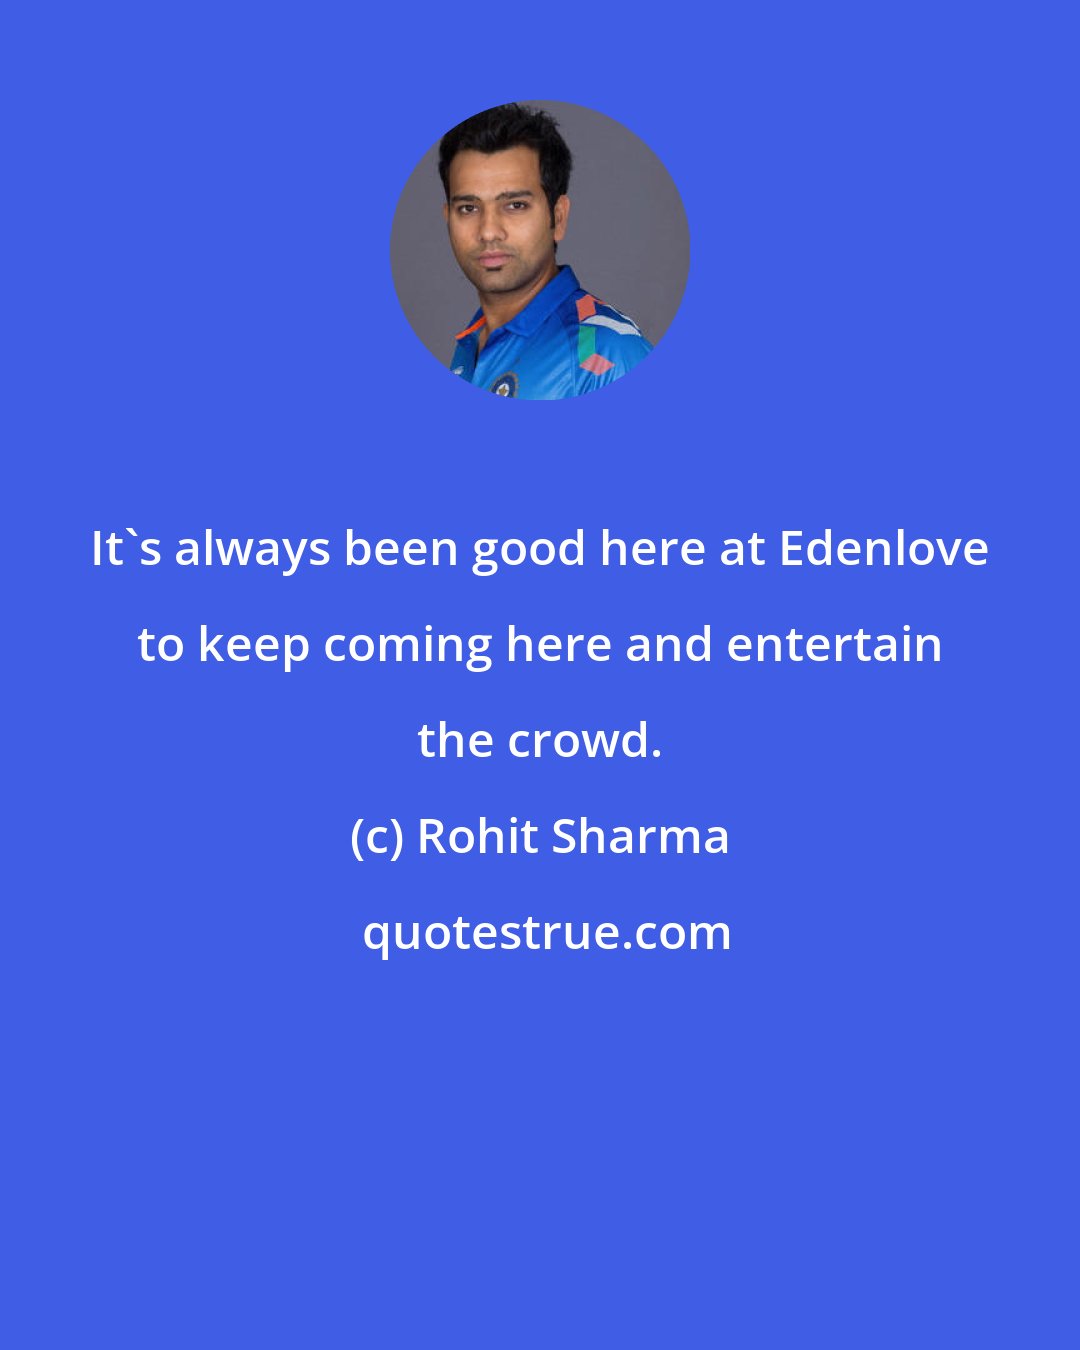 Rohit Sharma: It's always been good here at Edenlove to keep coming here and entertain the crowd.